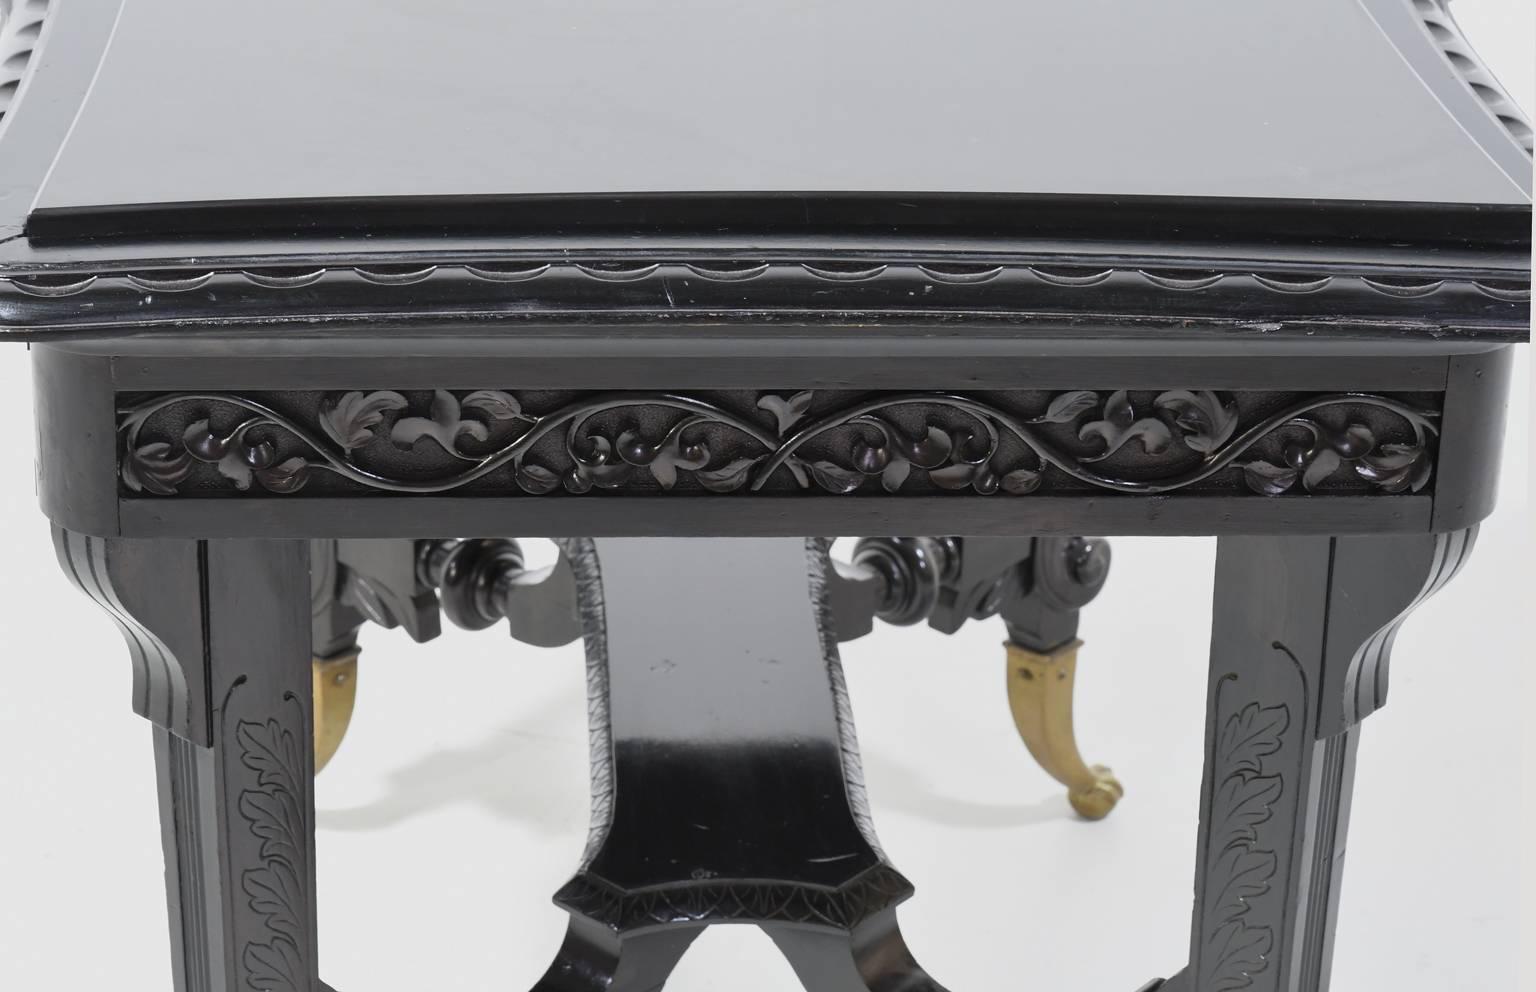 Late 19th Century Aesthetic Movement Centre Table in Carved Ebonized Wood with Brass Feet, c. 1870